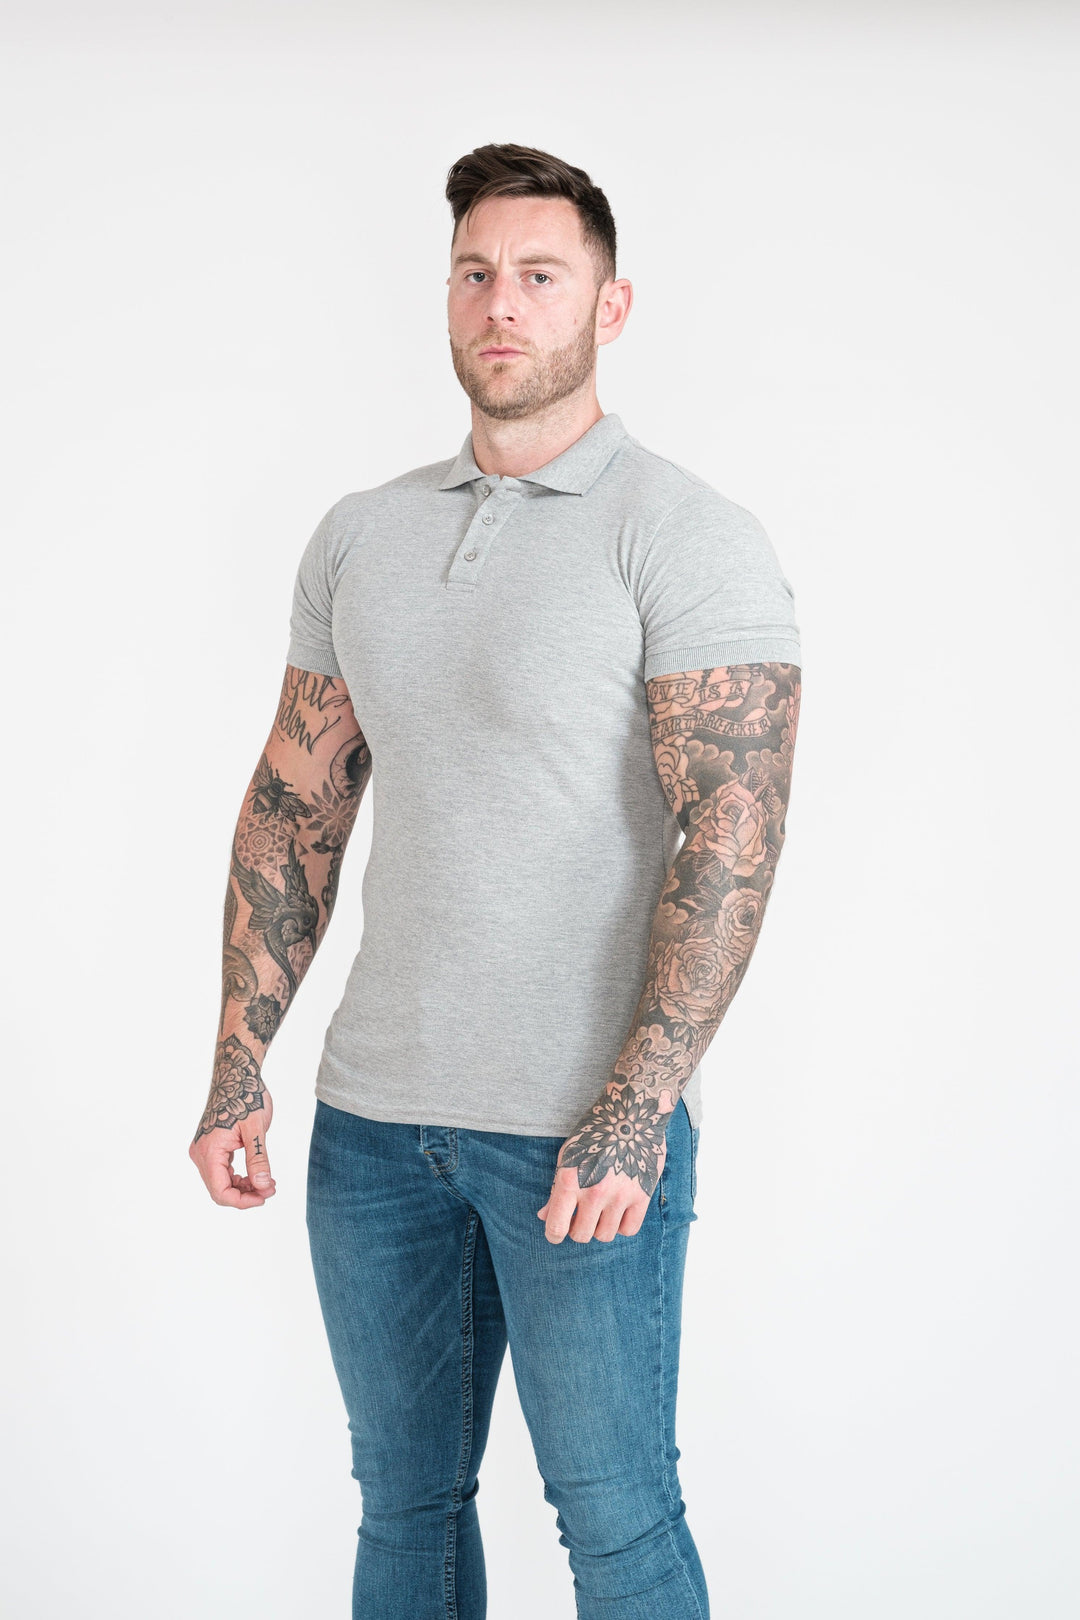 Muscle Fit Polo Shirt For Men in Grey. A Proportionally Fitted and Muscle Fit Polo. Ideal for muscular guys.